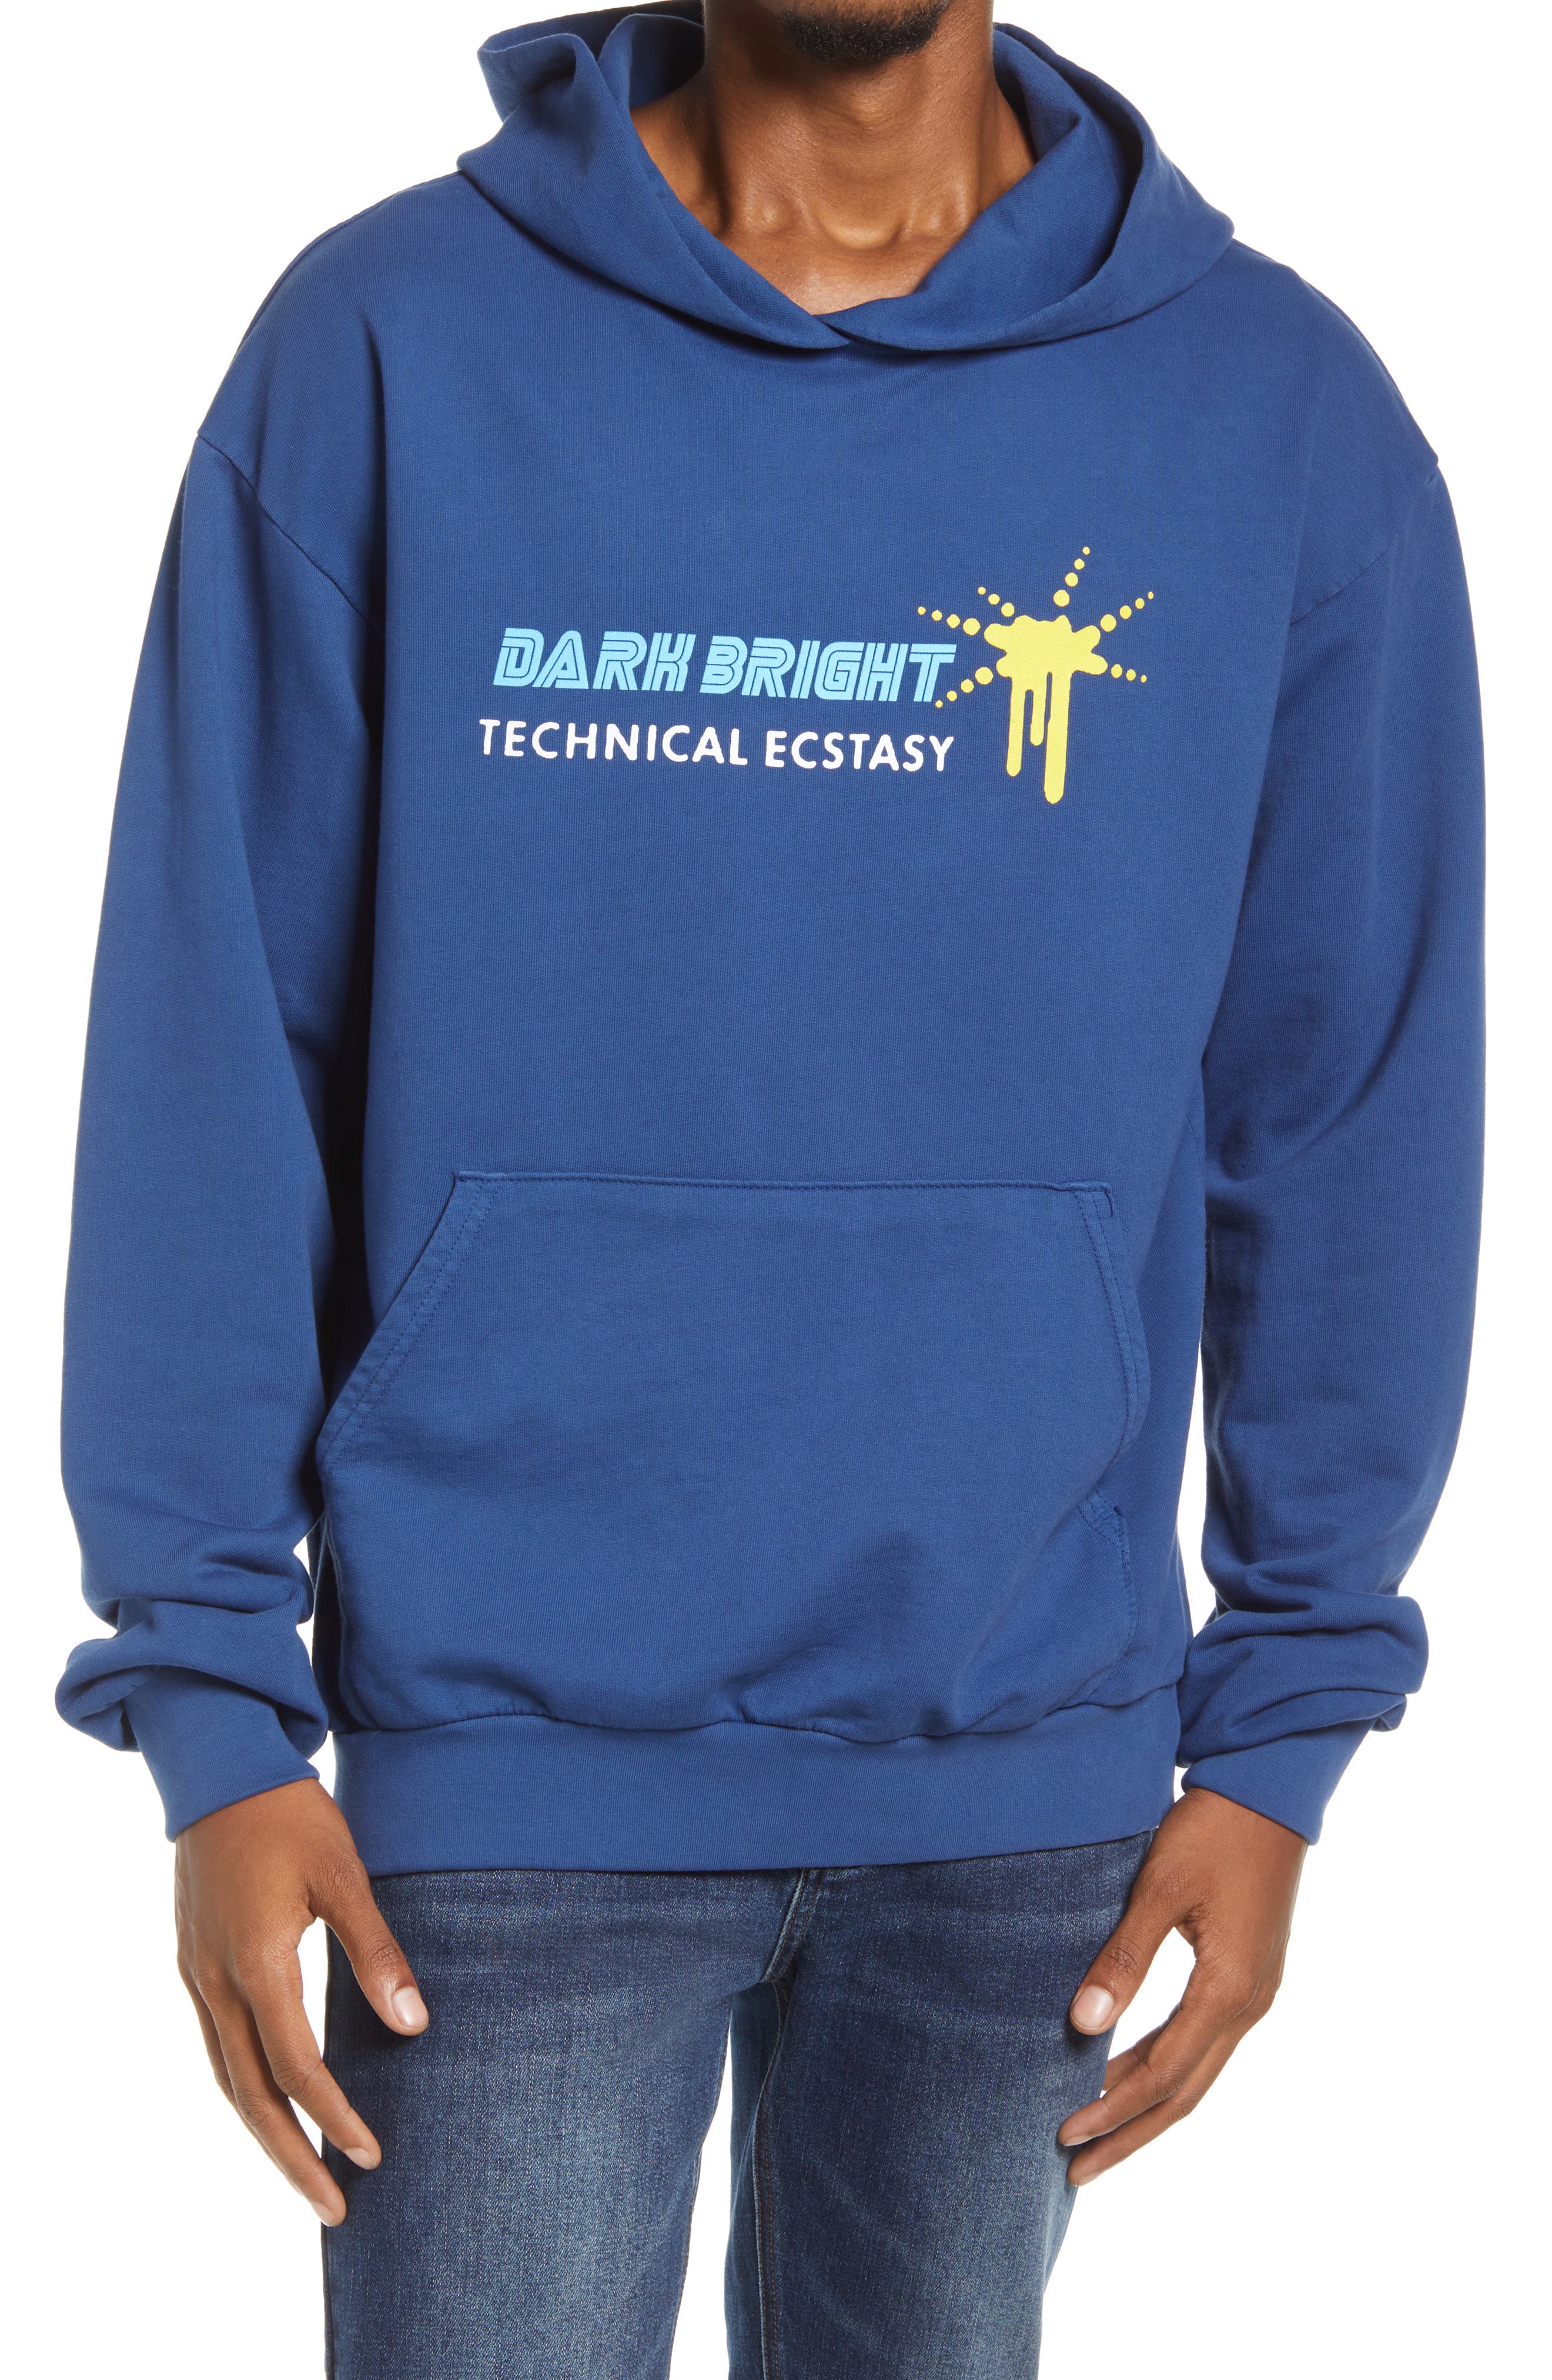 DARKBRIGHT Technical Ecstasy Oversize Graphic Hoodie in Blue at Nordstrom